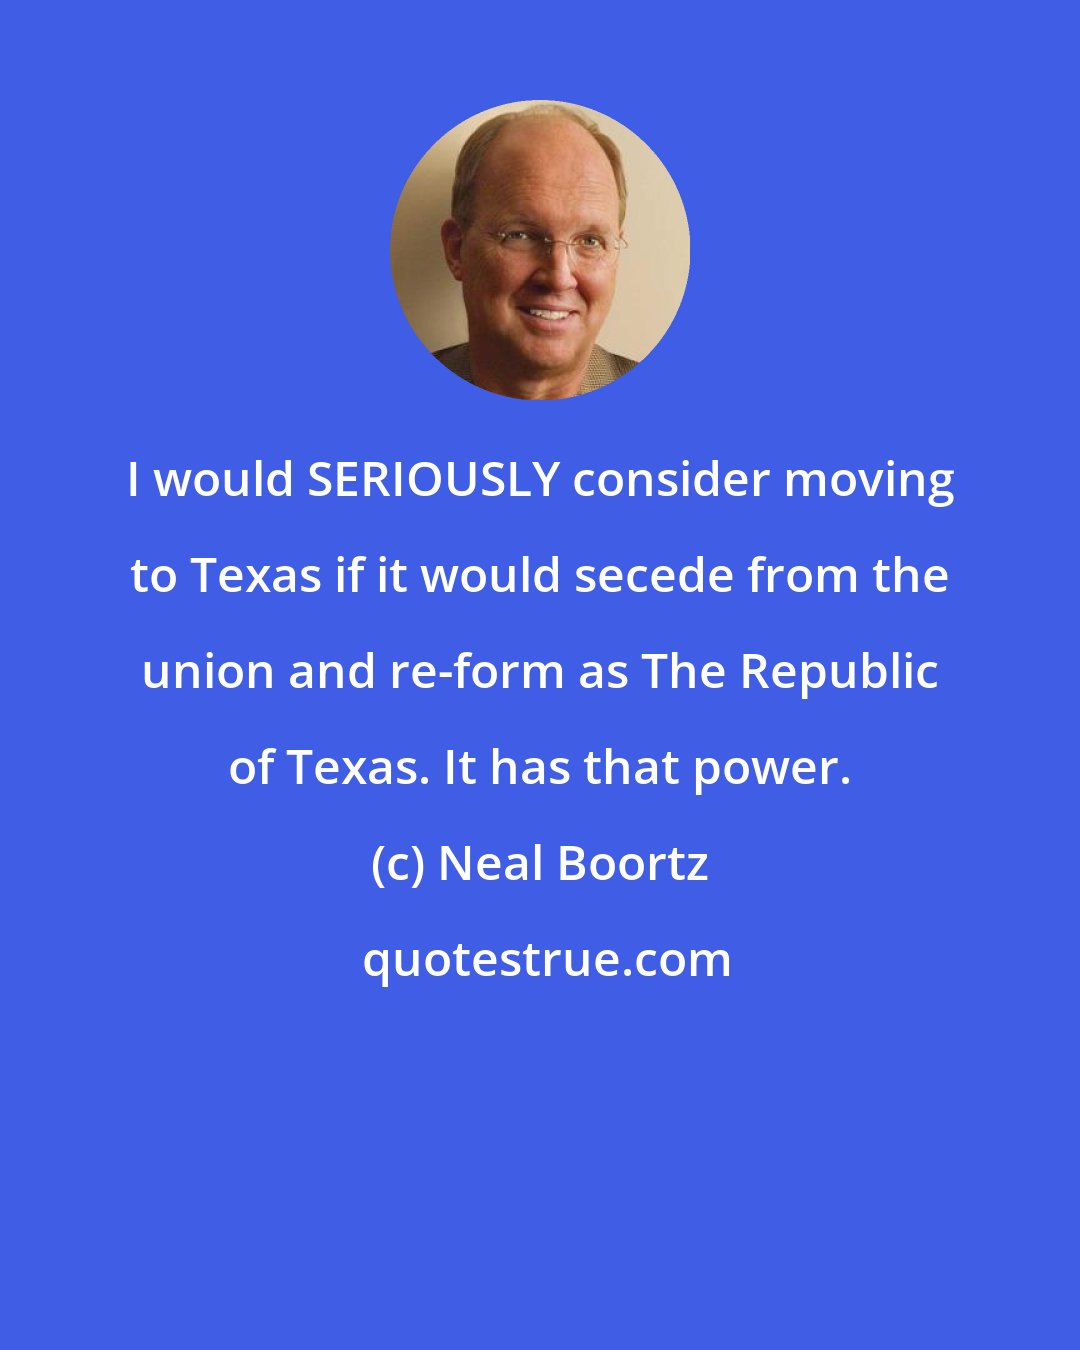 Neal Boortz: I would SERIOUSLY consider moving to Texas if it would secede from the union and re-form as The Republic of Texas. It has that power.